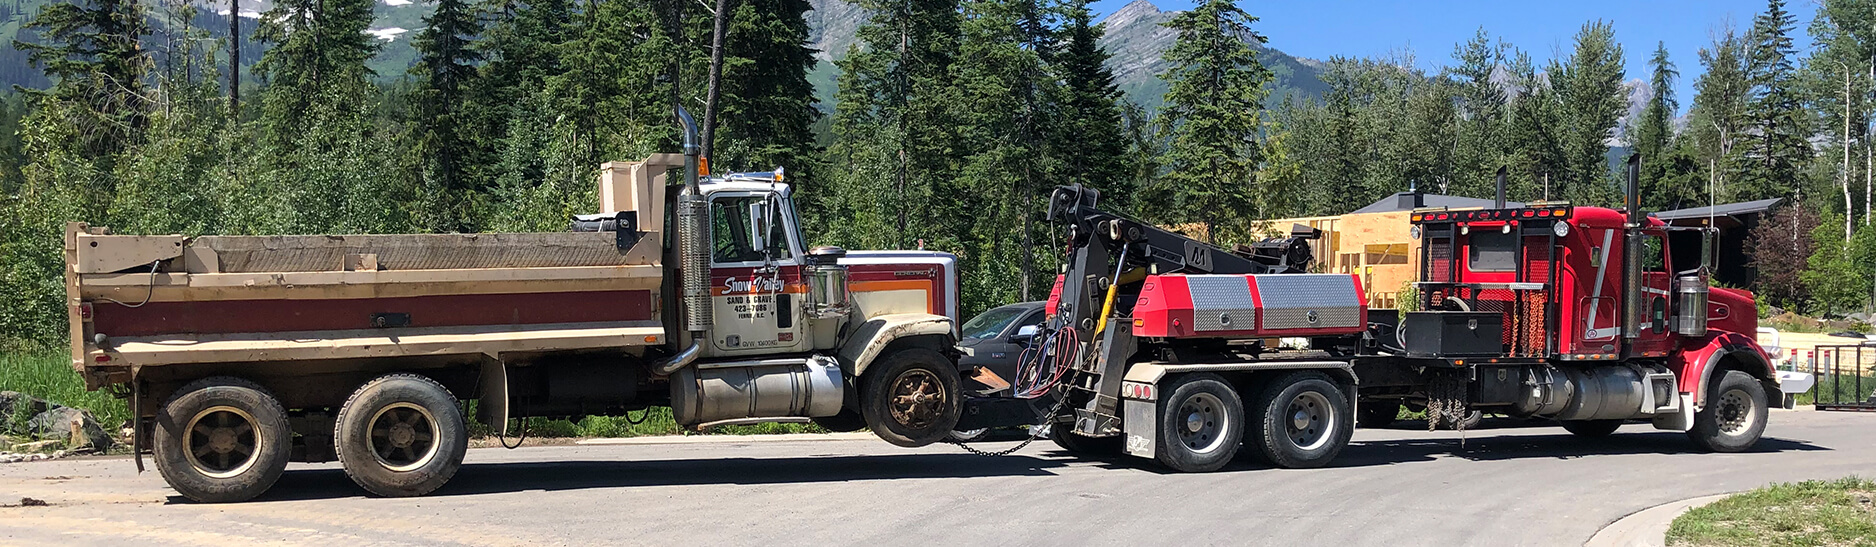 Pincher Creek Towing, Roadside Assistance and Heavy Duty Towing